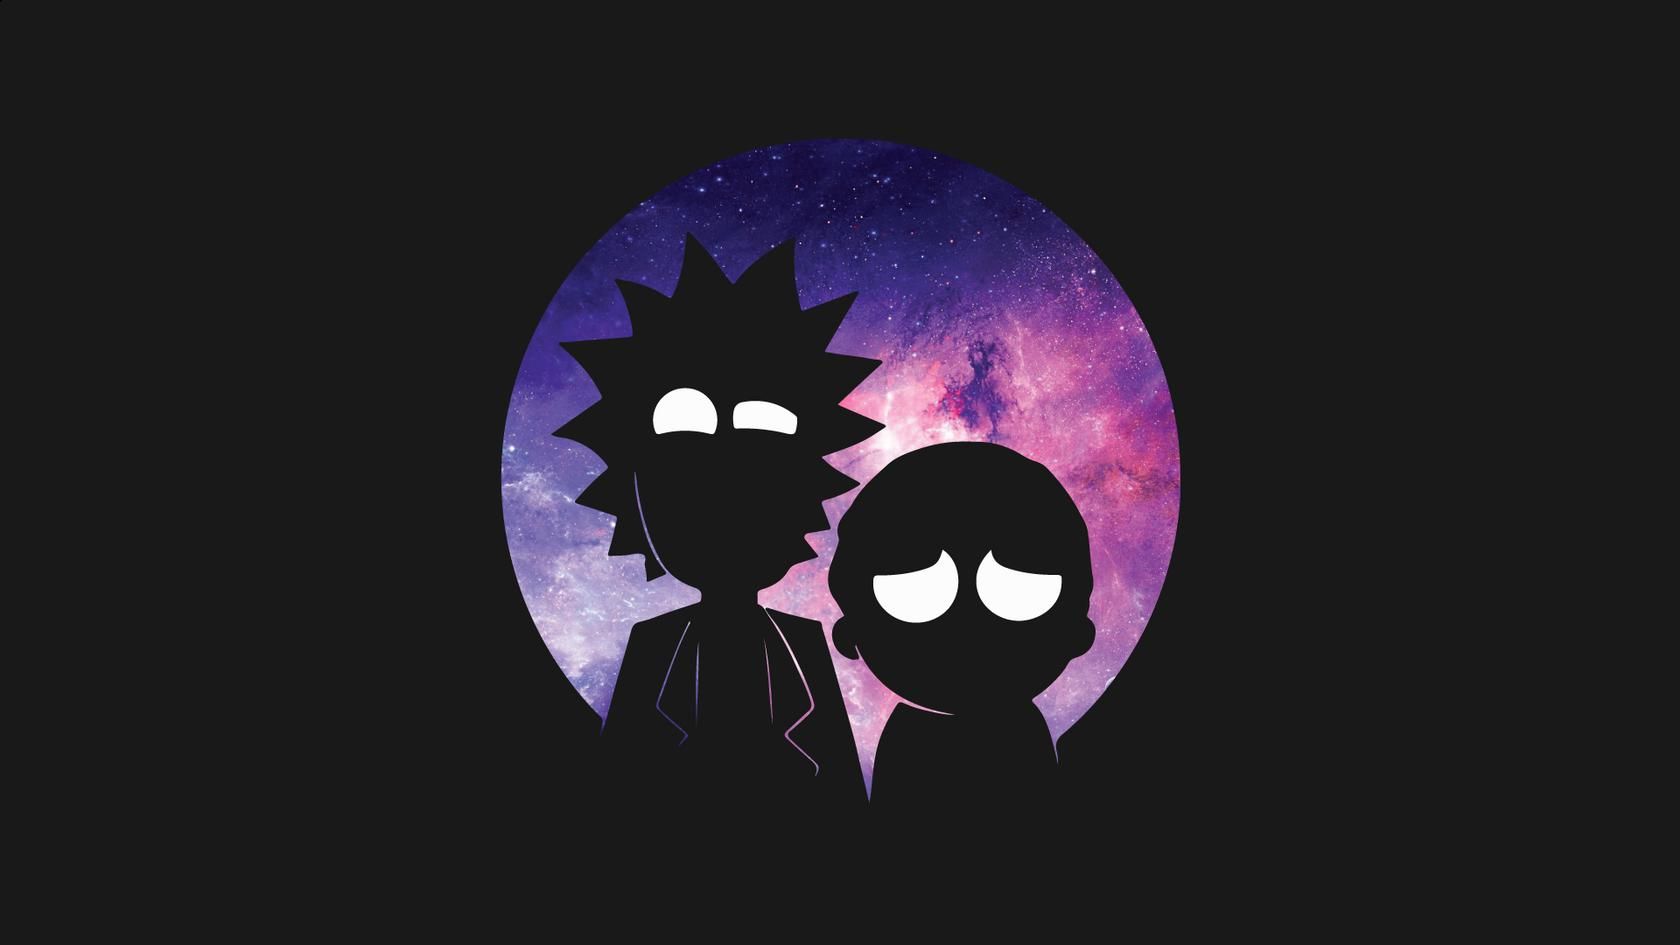 Rick And Morty Hd Wallpapers posted by Christopher Johnson.